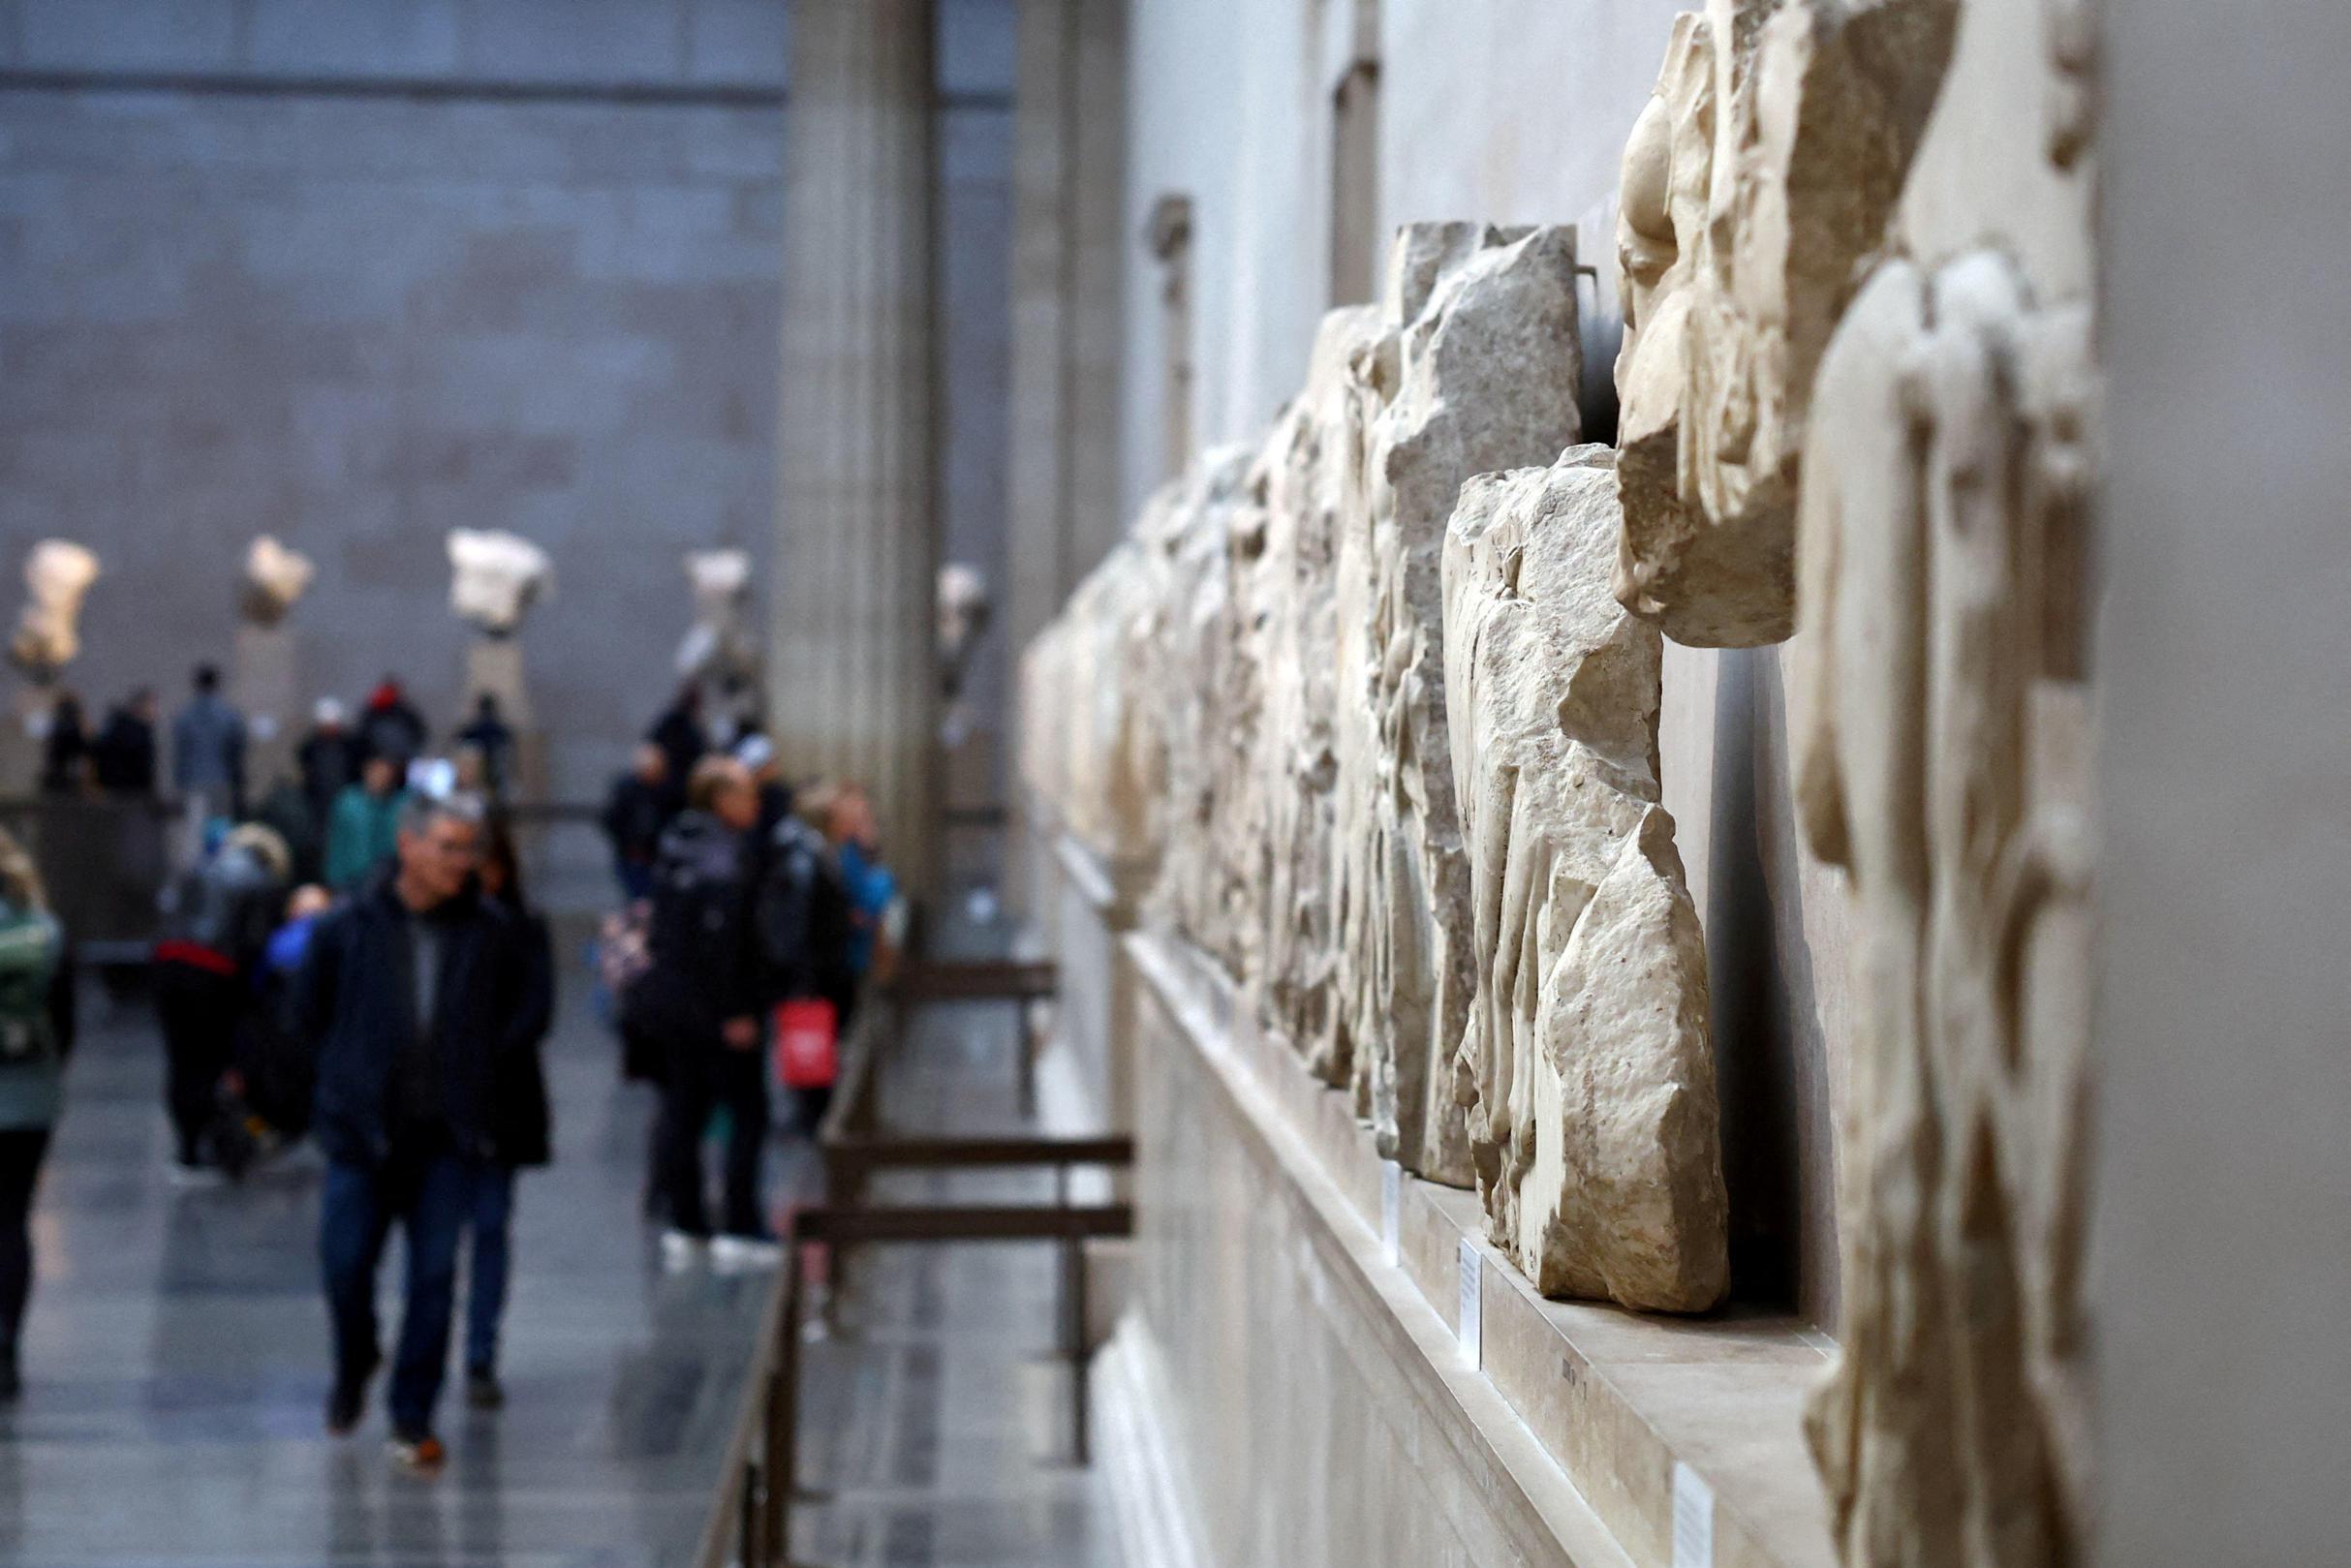 Judge requests access to online accounts of British Museum employee involved in theft of museum pieces